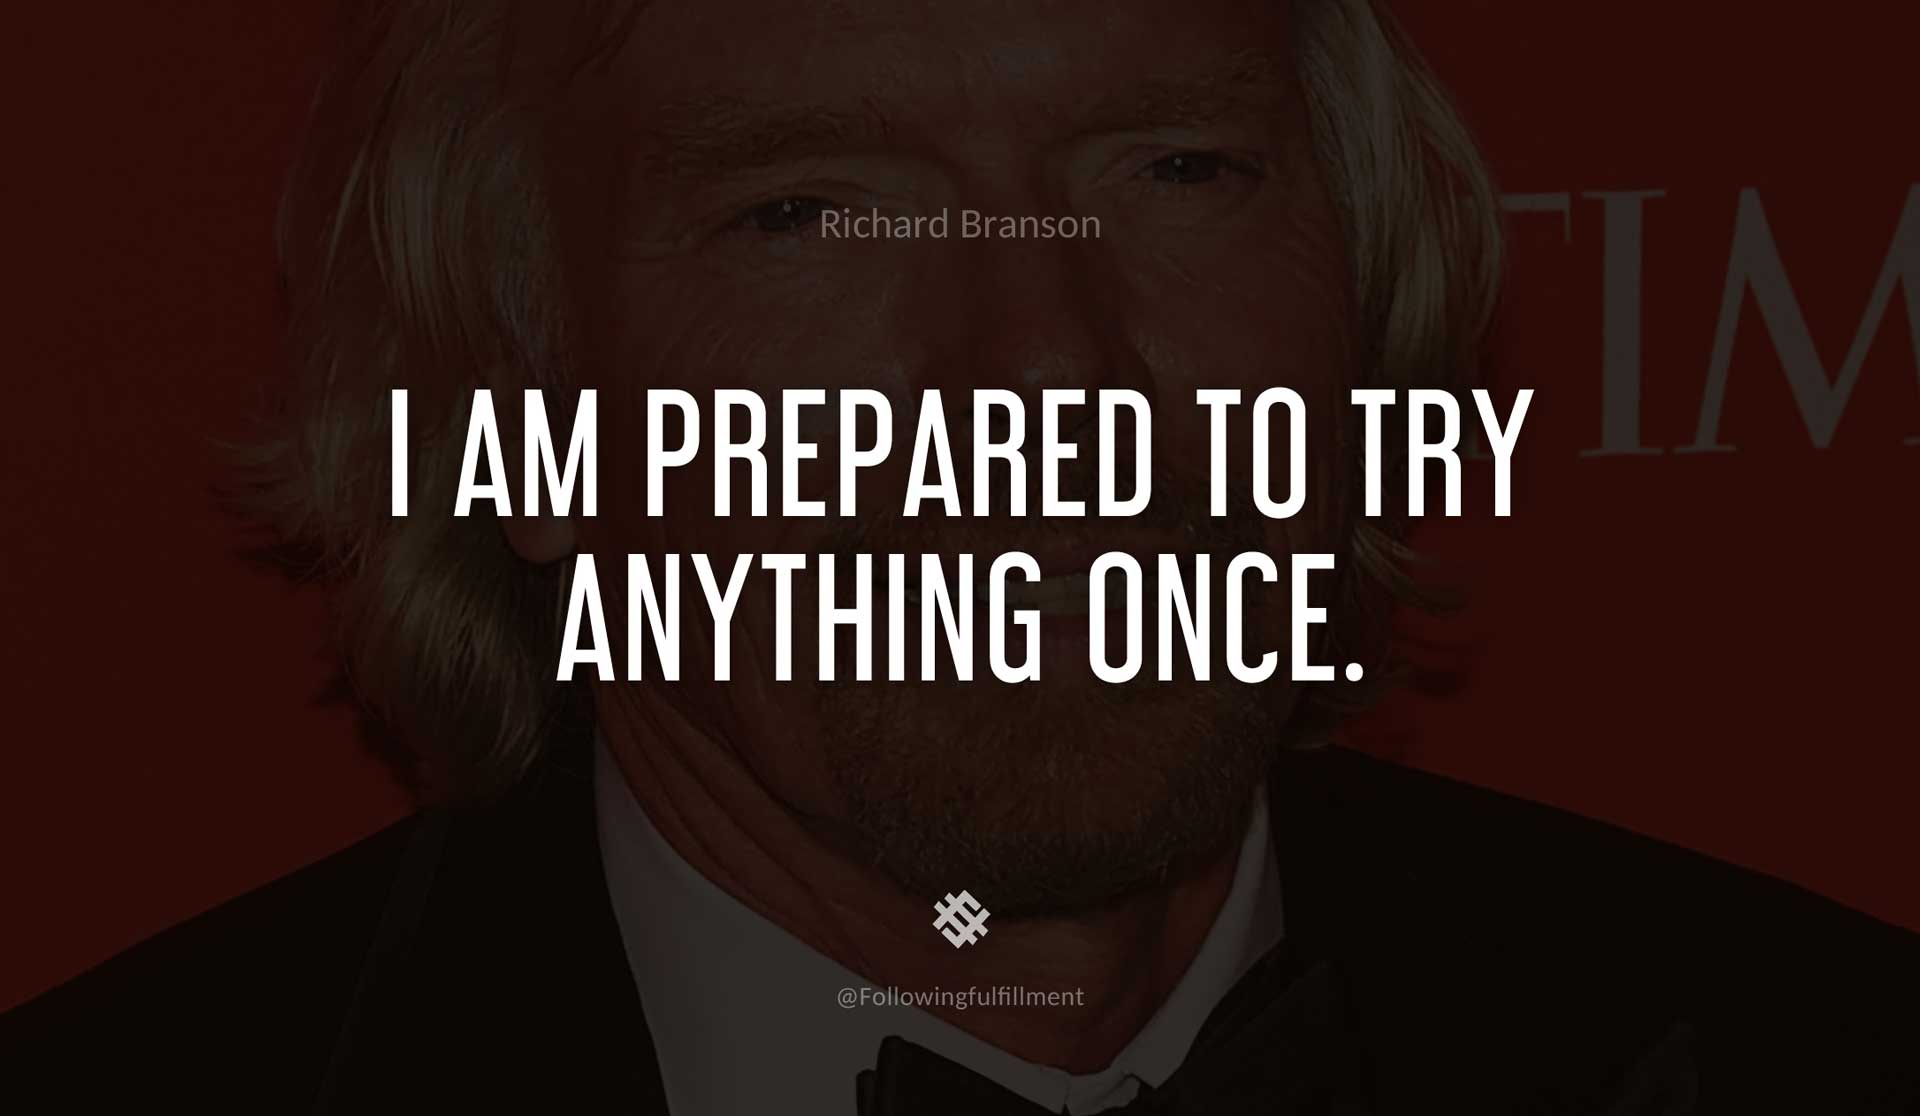 I-am-prepared-to-try-anything-once.-RICHARD-BRANSON-Quote.jpg